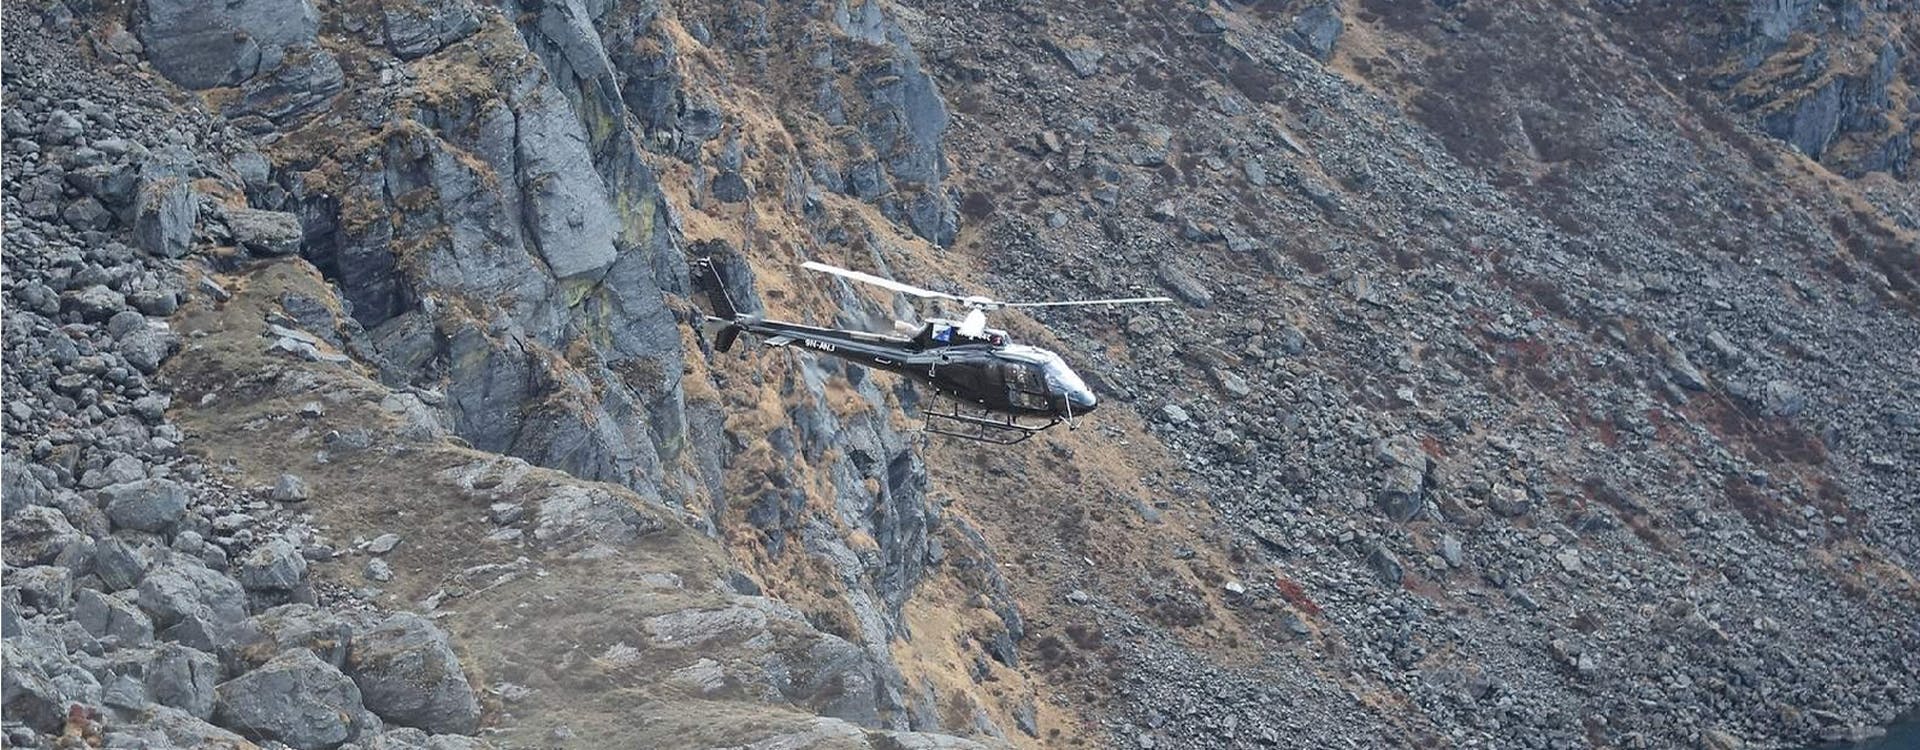 Helicopter taking off between the mountains